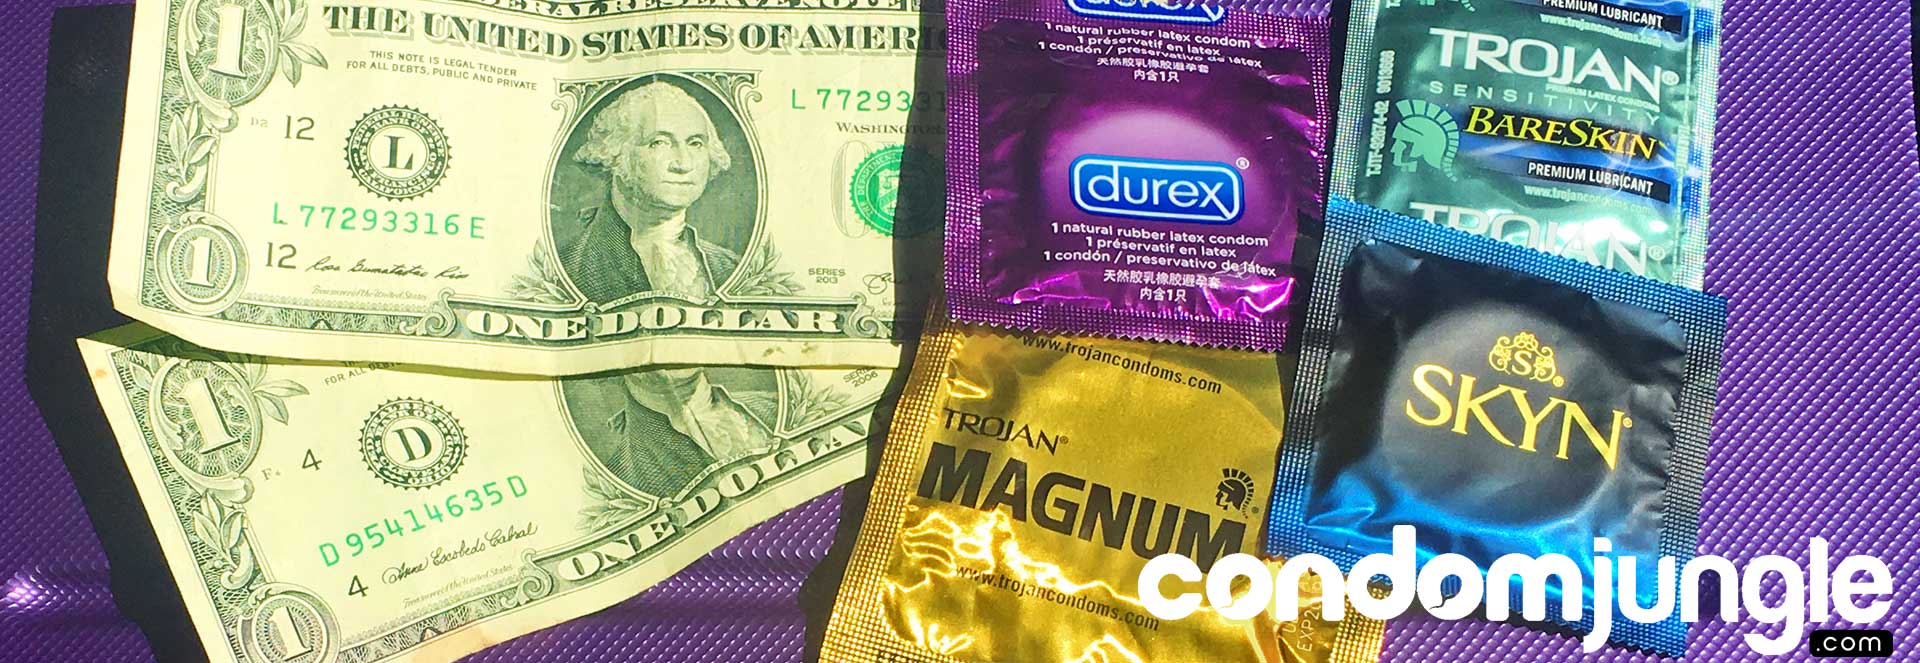 17 Simple Condom Facts Everyone Should Know